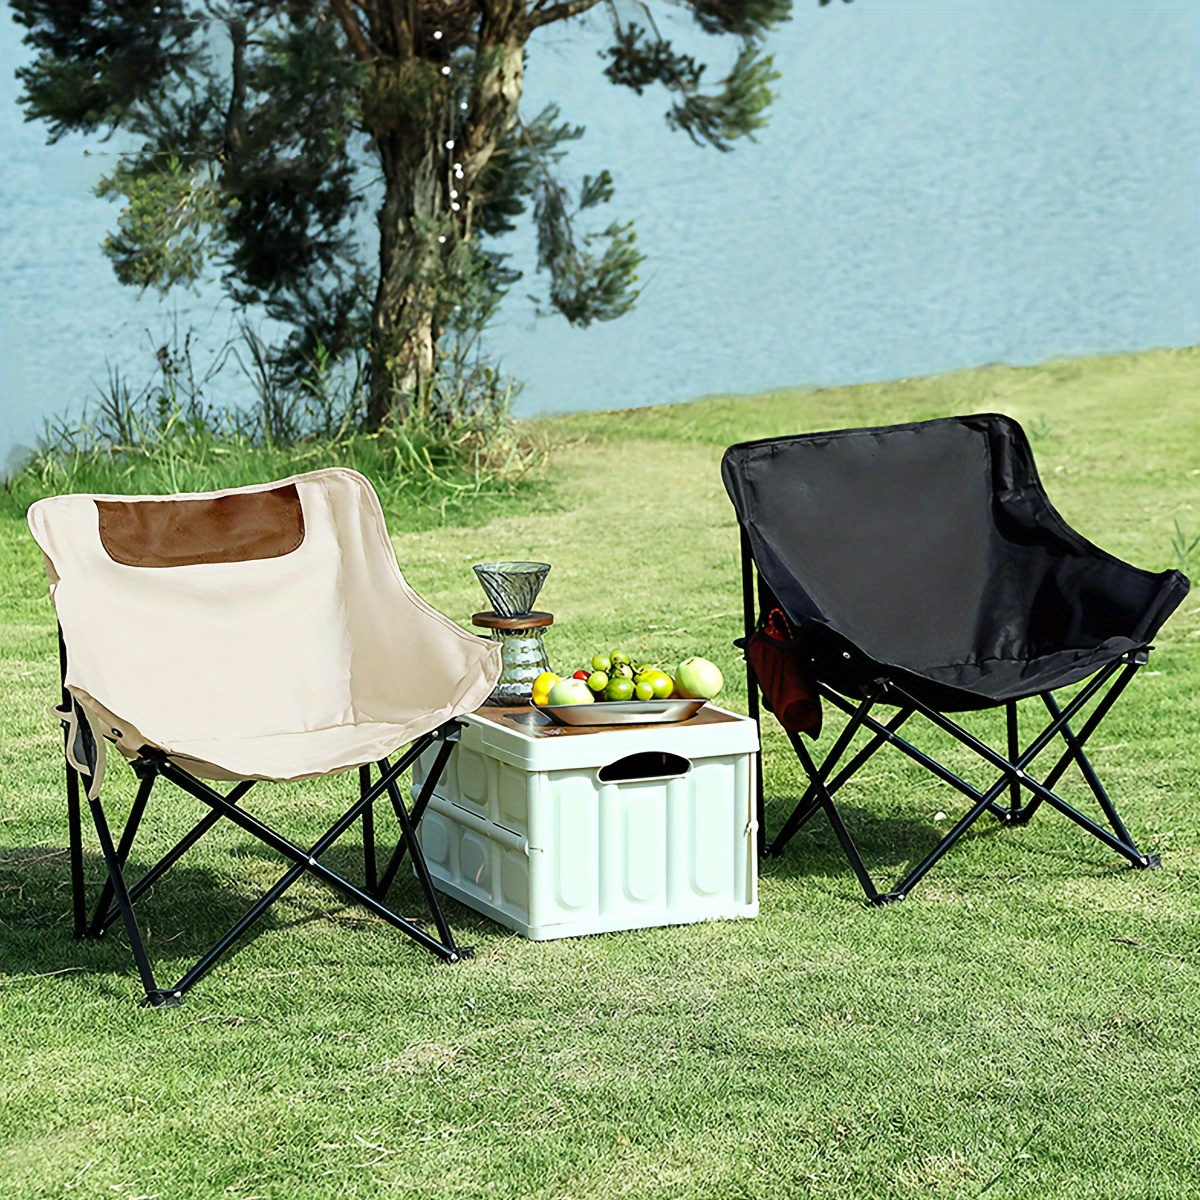 Portable Outdoor 2-Seat Folding Chair with Removable Sun Umbrella for  Camping Picnic Beach Hiking Fishing Picnic Barbecue